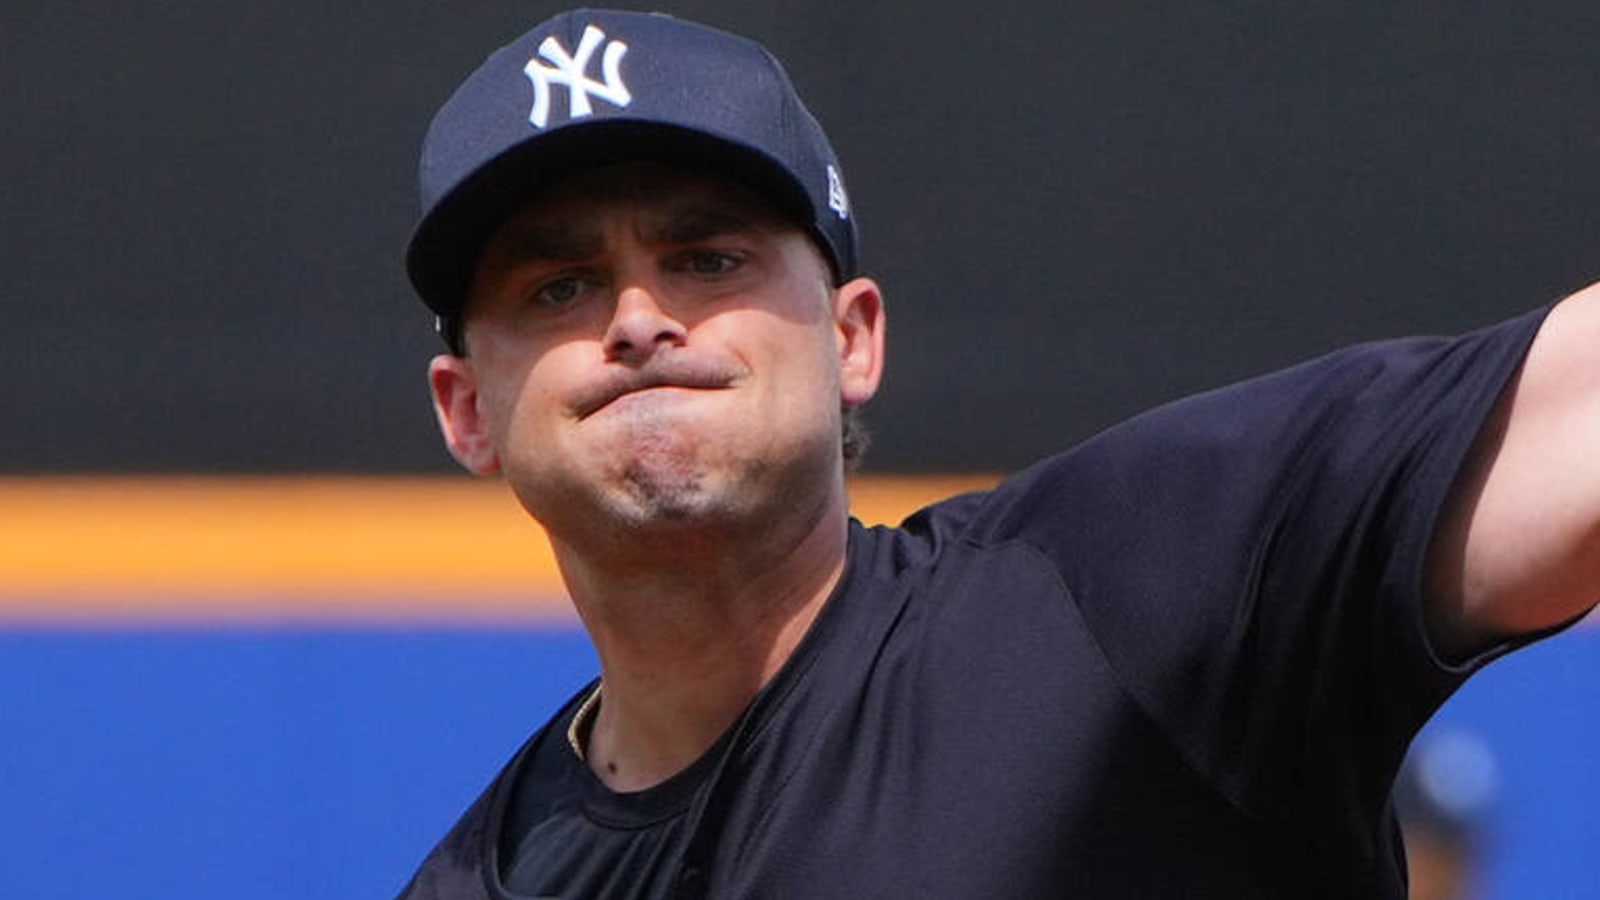 Yankees designate veteran reliever for assignment to make room on 40-man roster